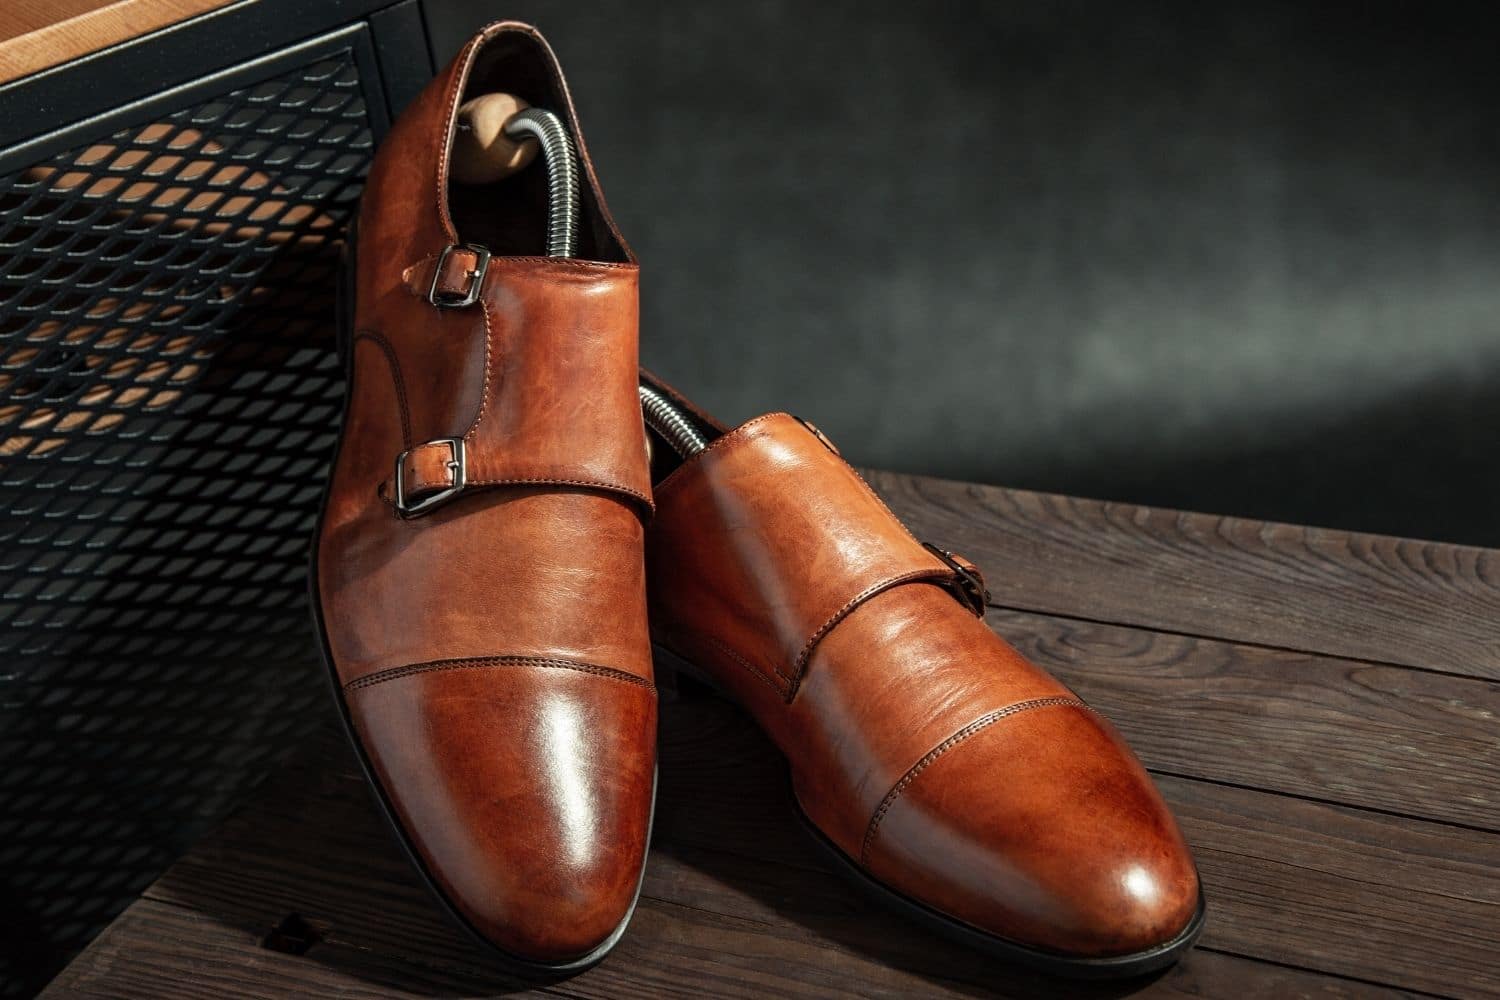 How to Wear Monk Strap Shoes